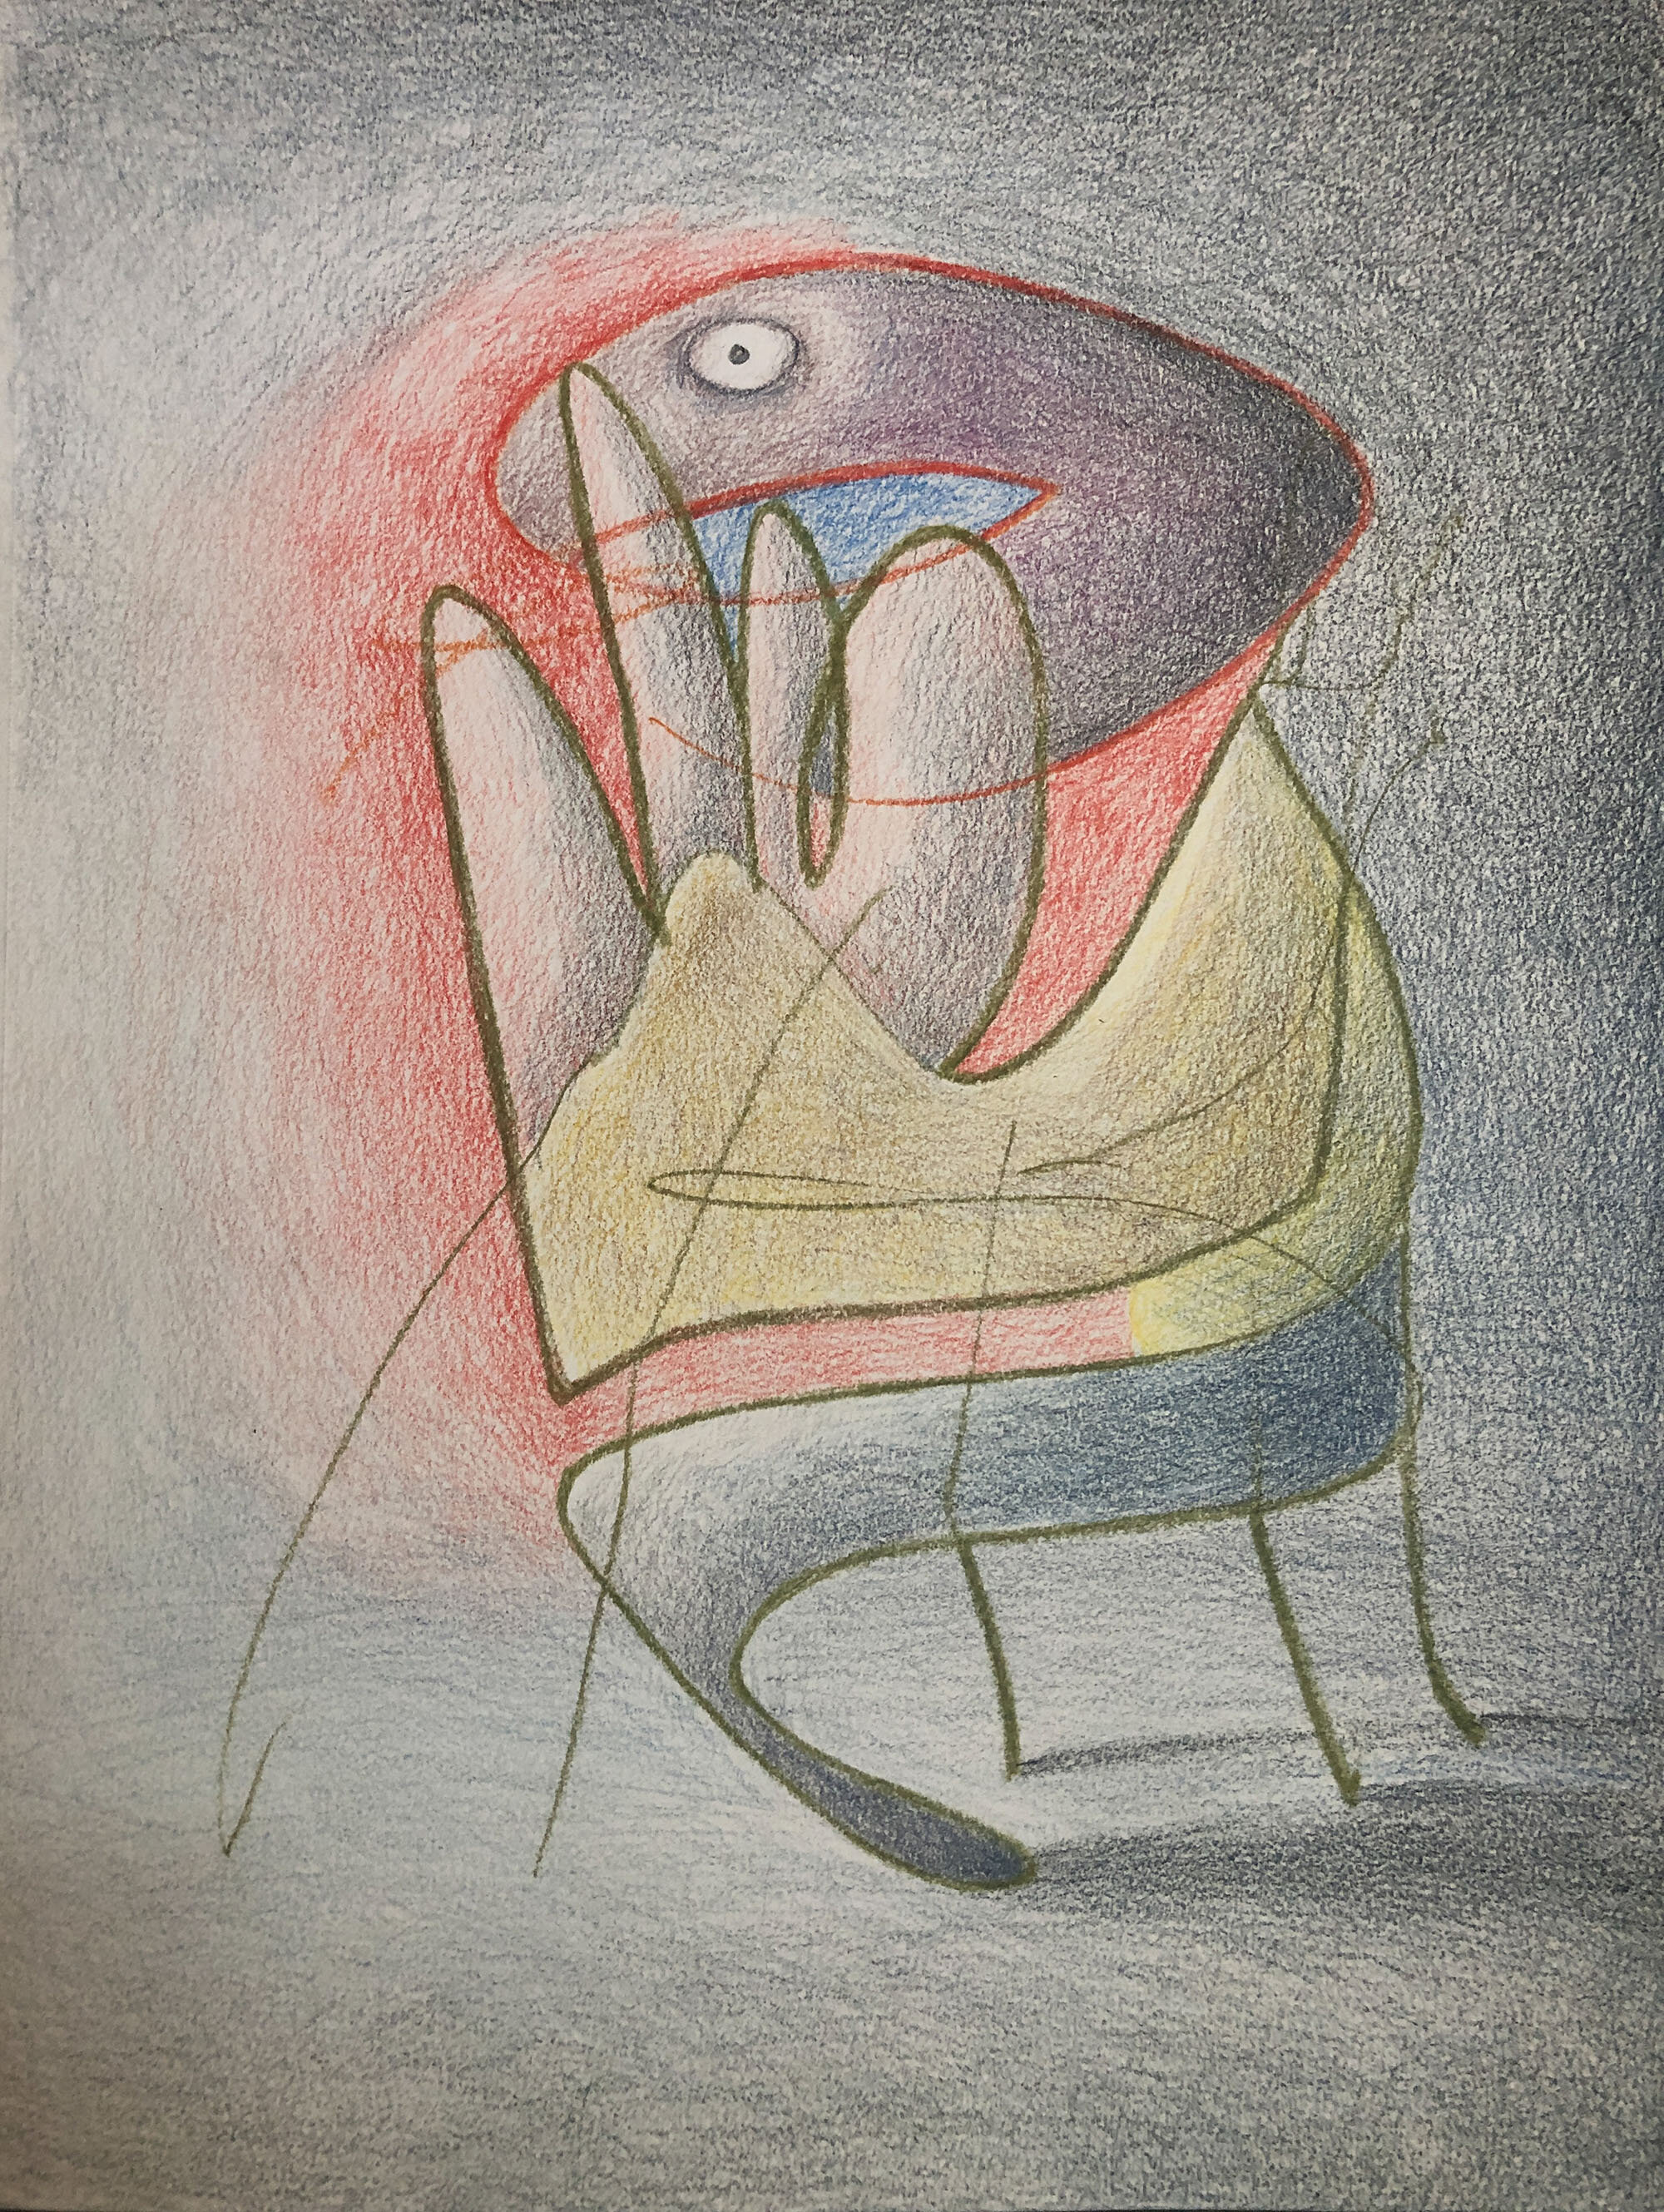 SOLD Too Much Information 9" x 12" Colored Pencil on Paper